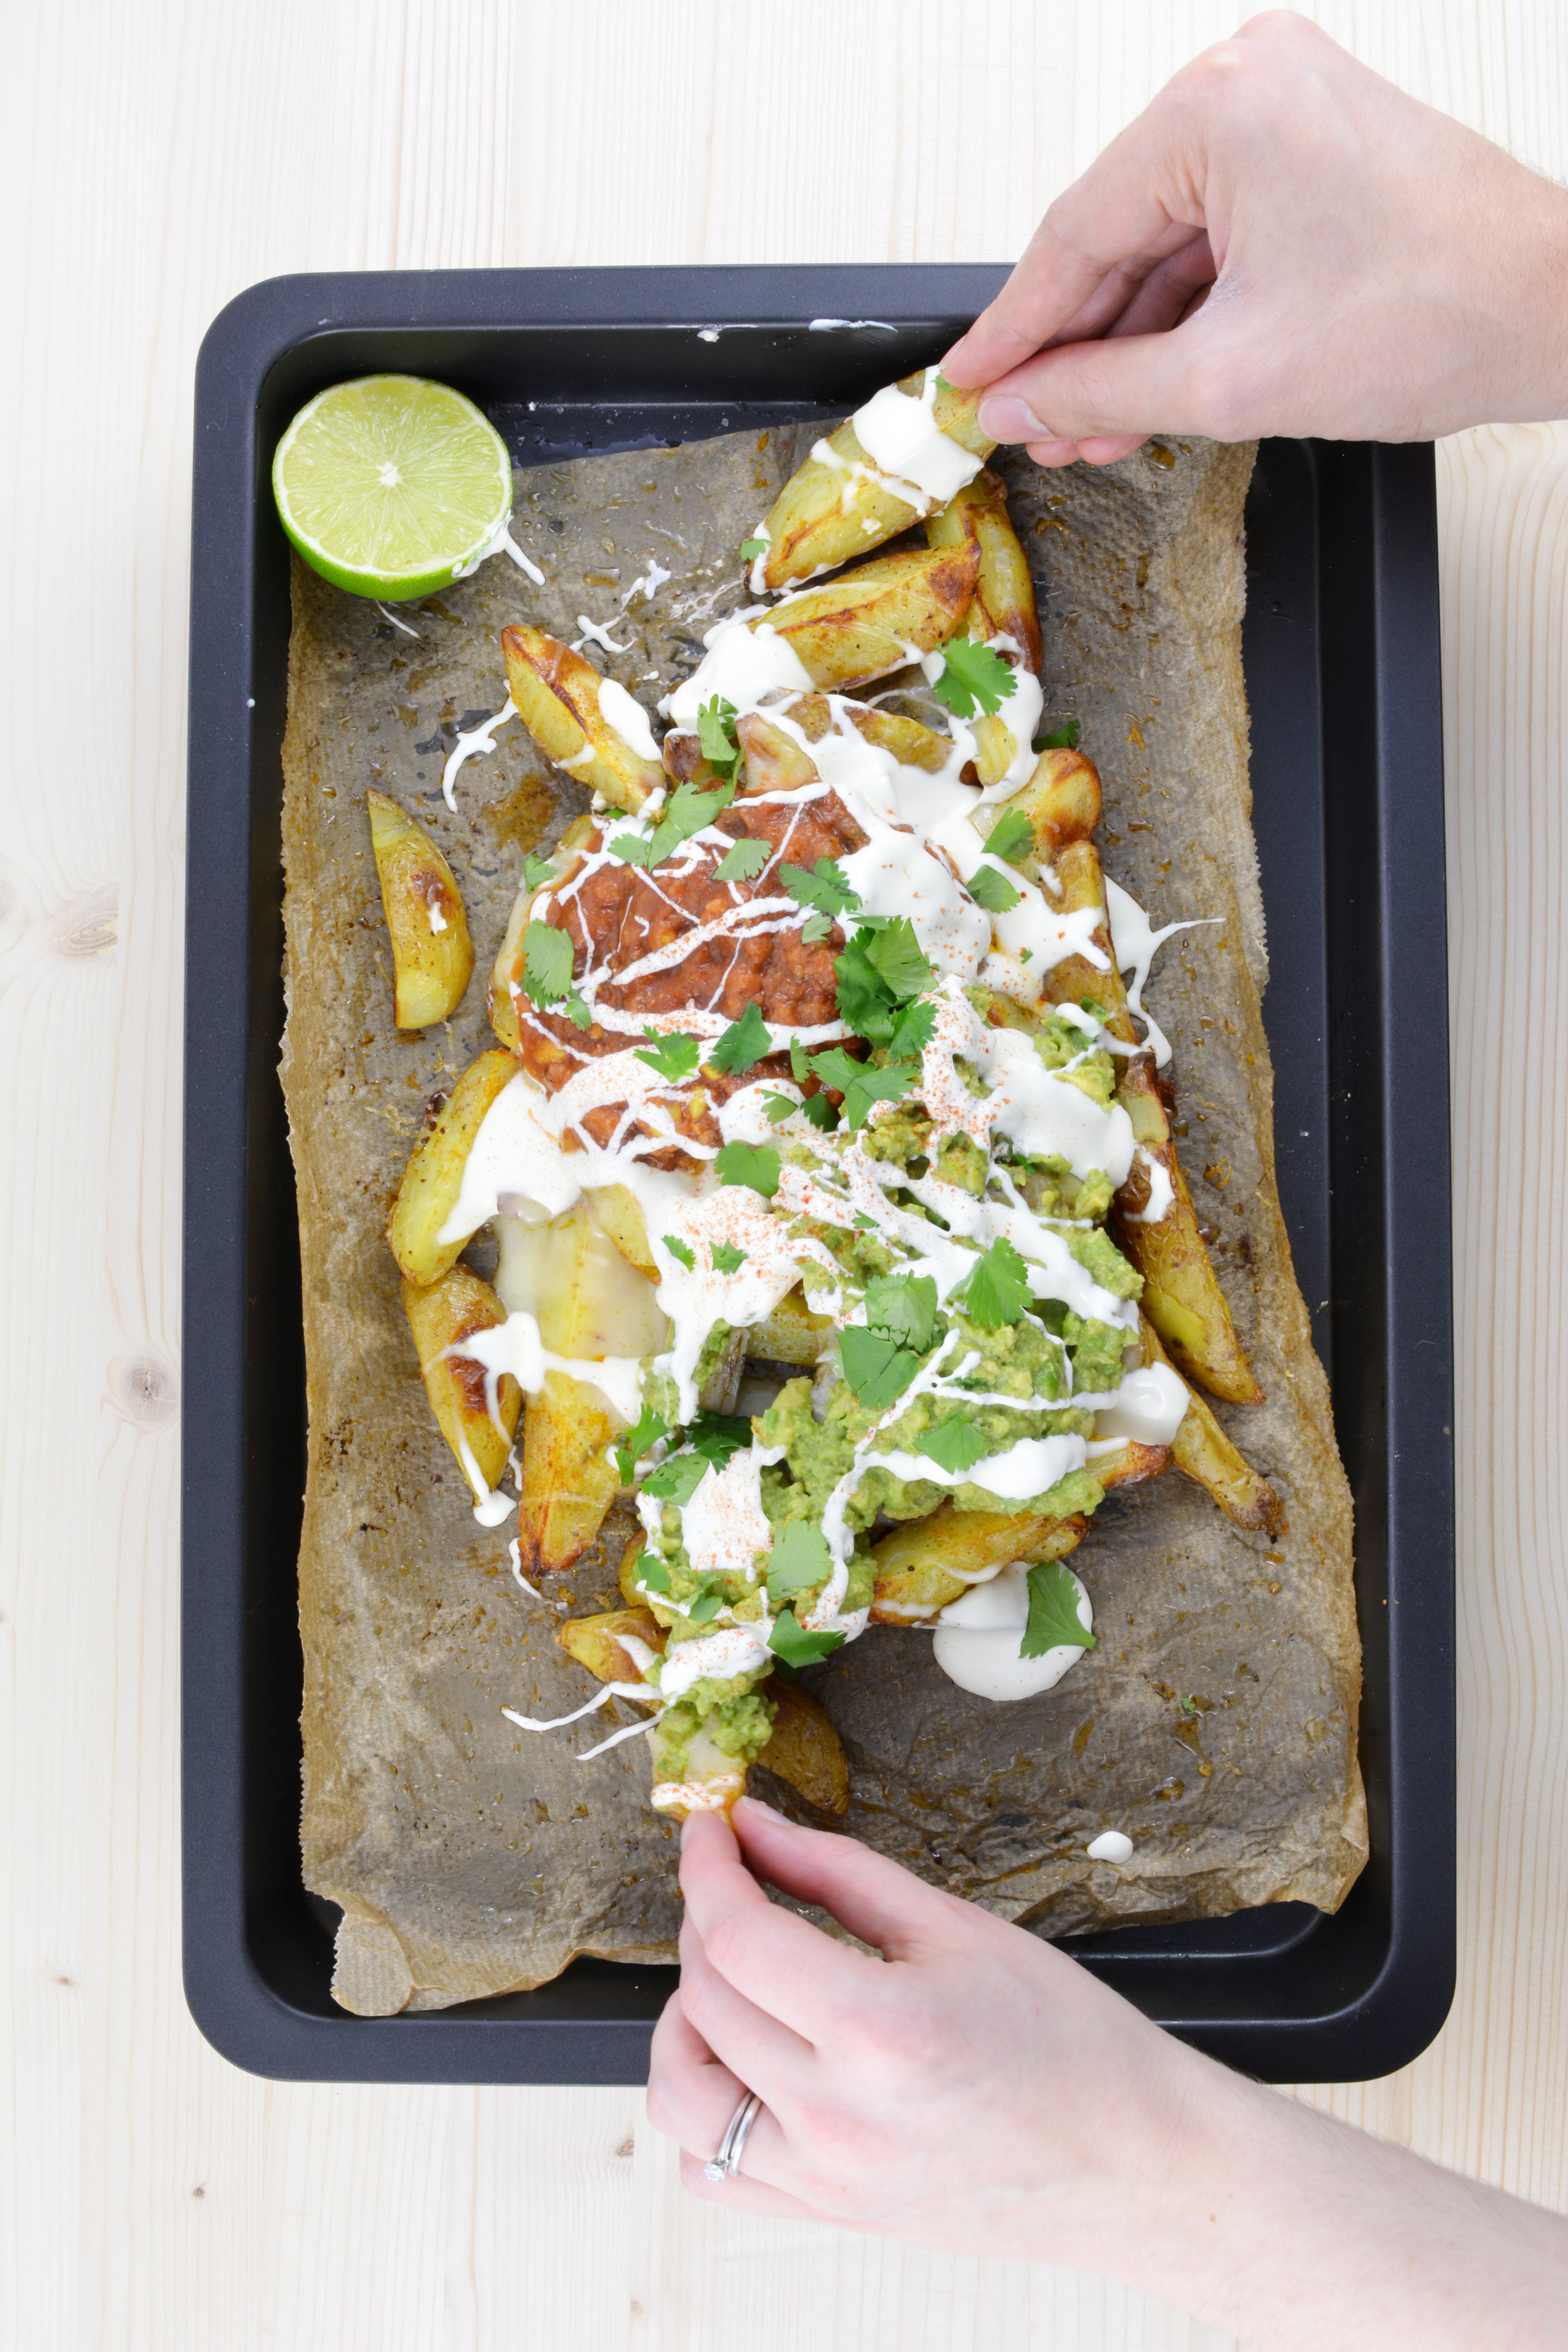 an overhead view of a baking tray featuring potato wedge nachos generously topped with guacamole, salsa, and sour cream. Two hands are reaching for a potato wedge on the tray